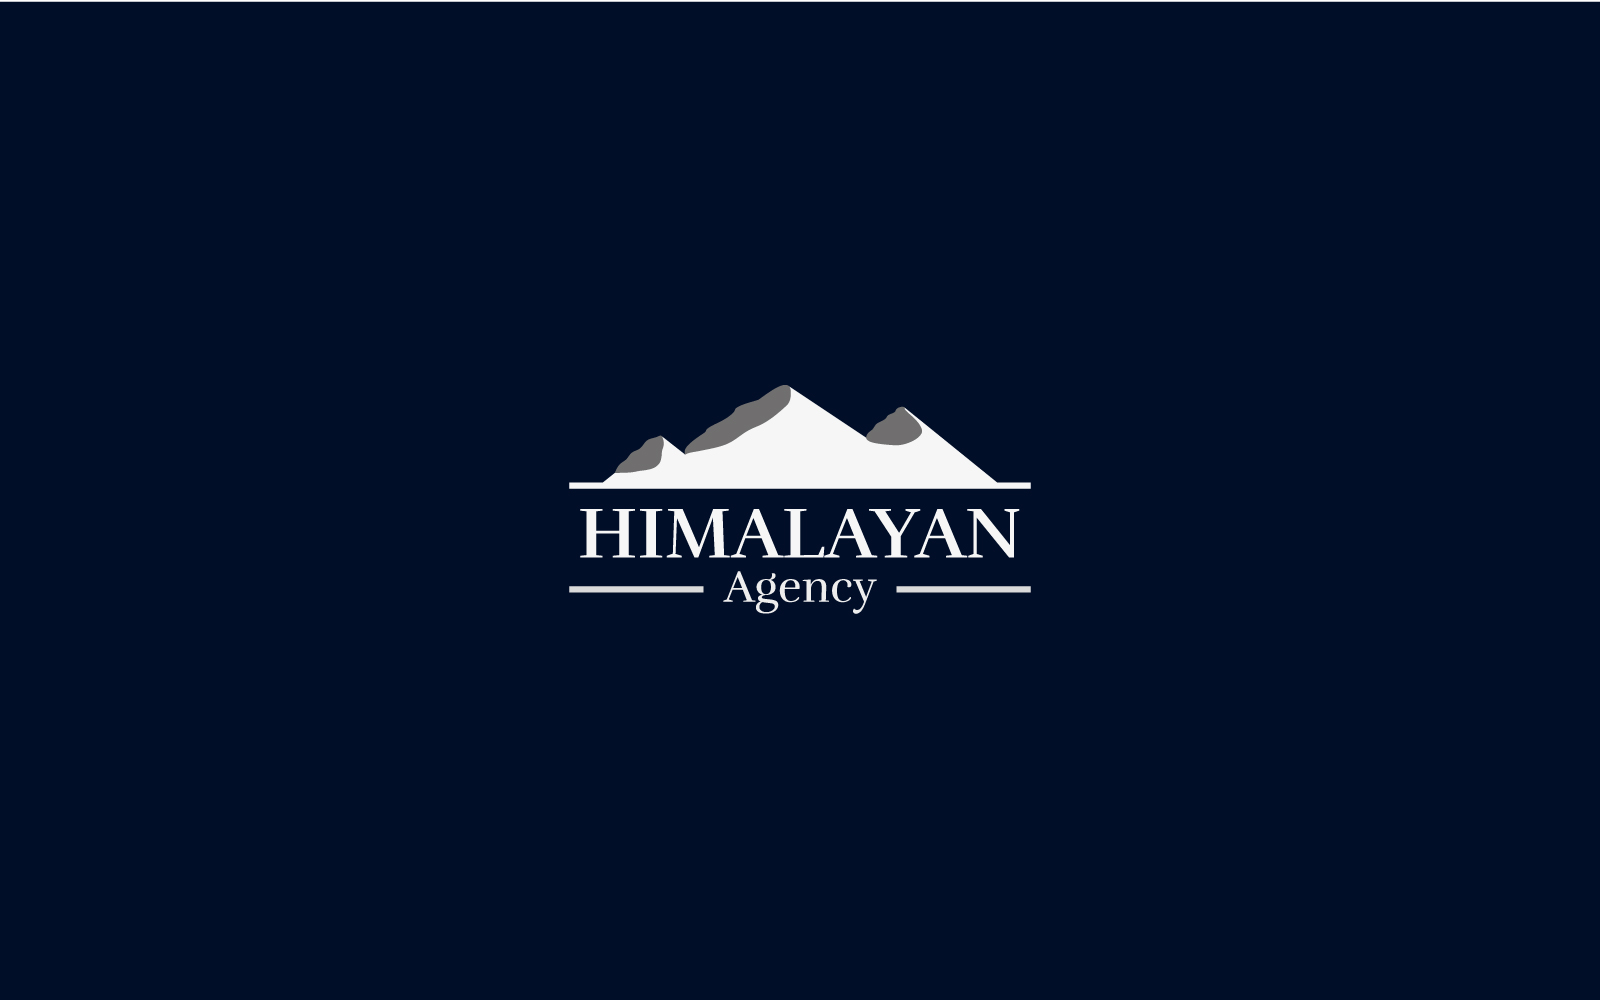 Mountain logo for hill areas company